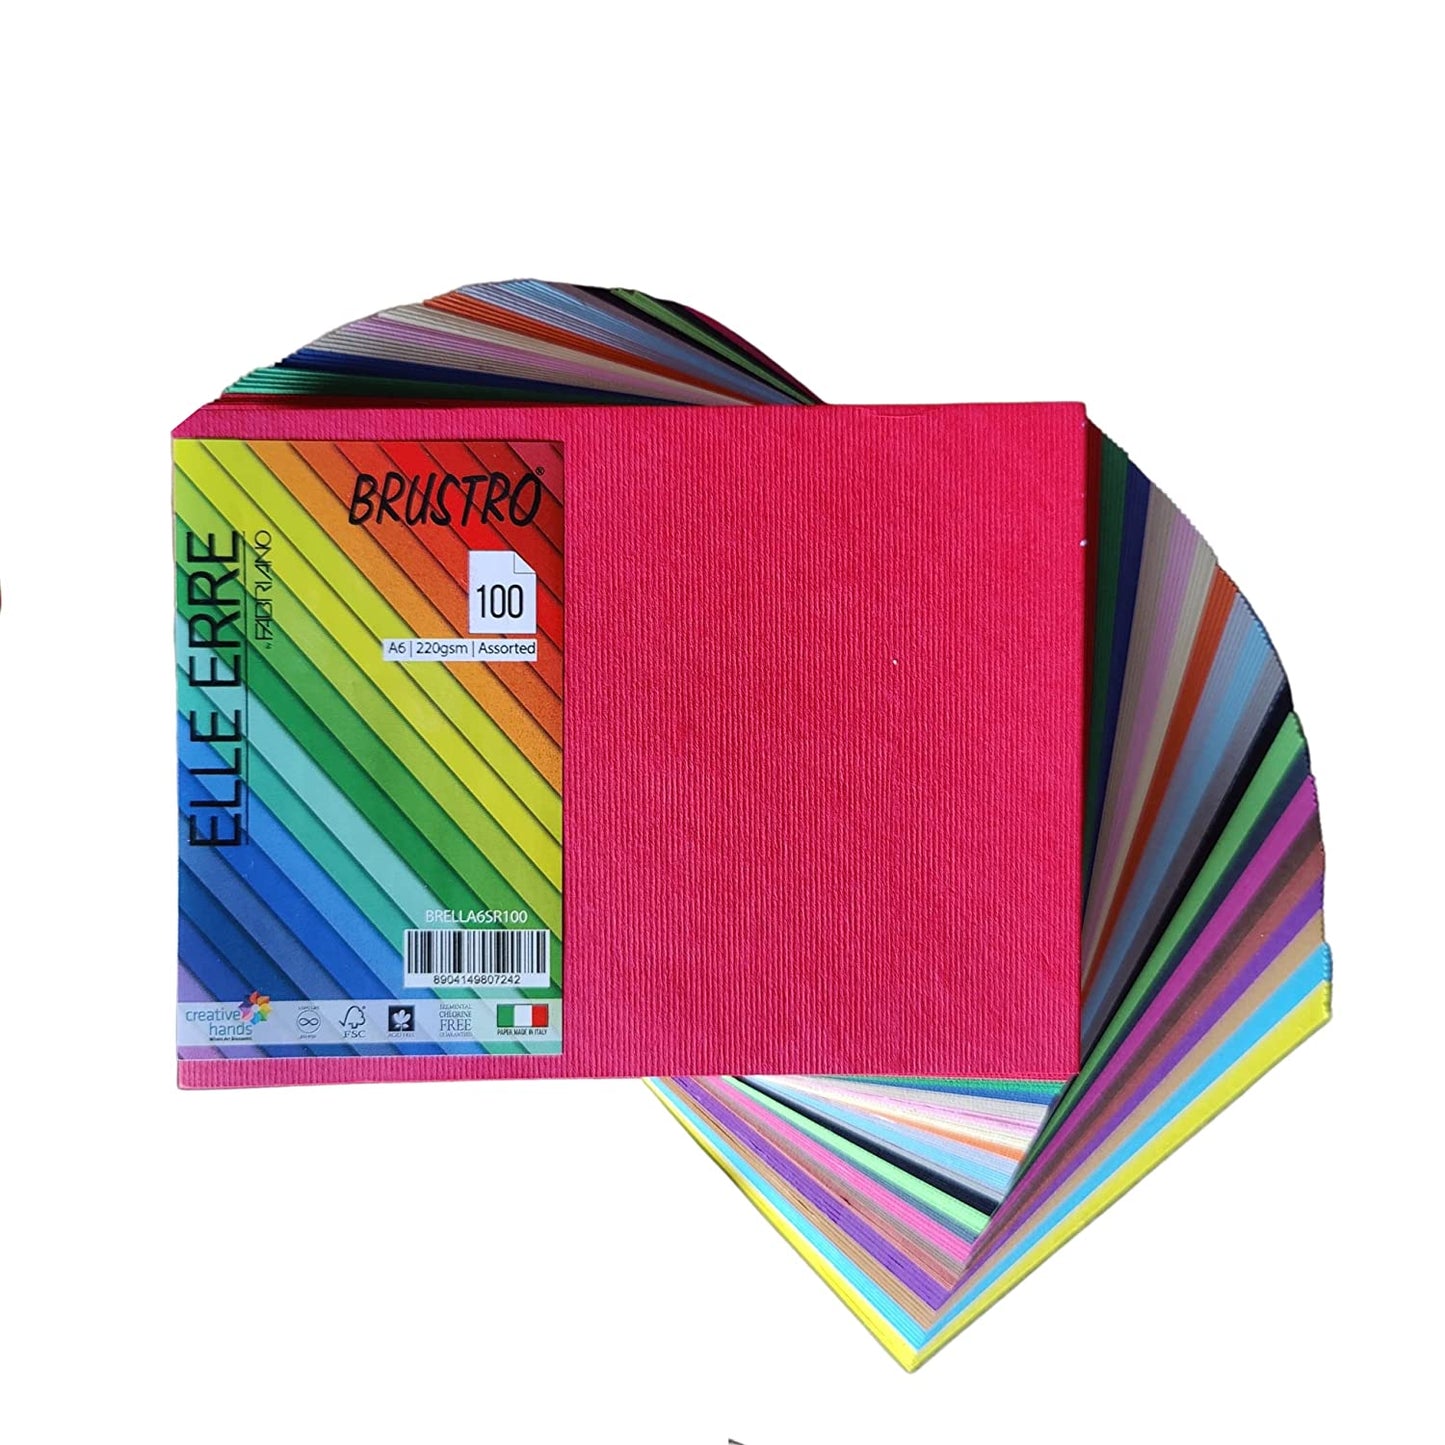 BRUSTRO Elle Erre Cardstock A6 Size, 220 GSM Assorted Colour, Pack of 20 Shades (Both Bright & Soft Mixed) X 5 Sheets (Total 100 Sheets) with Textured Surface on one Side and Smooth on Other.